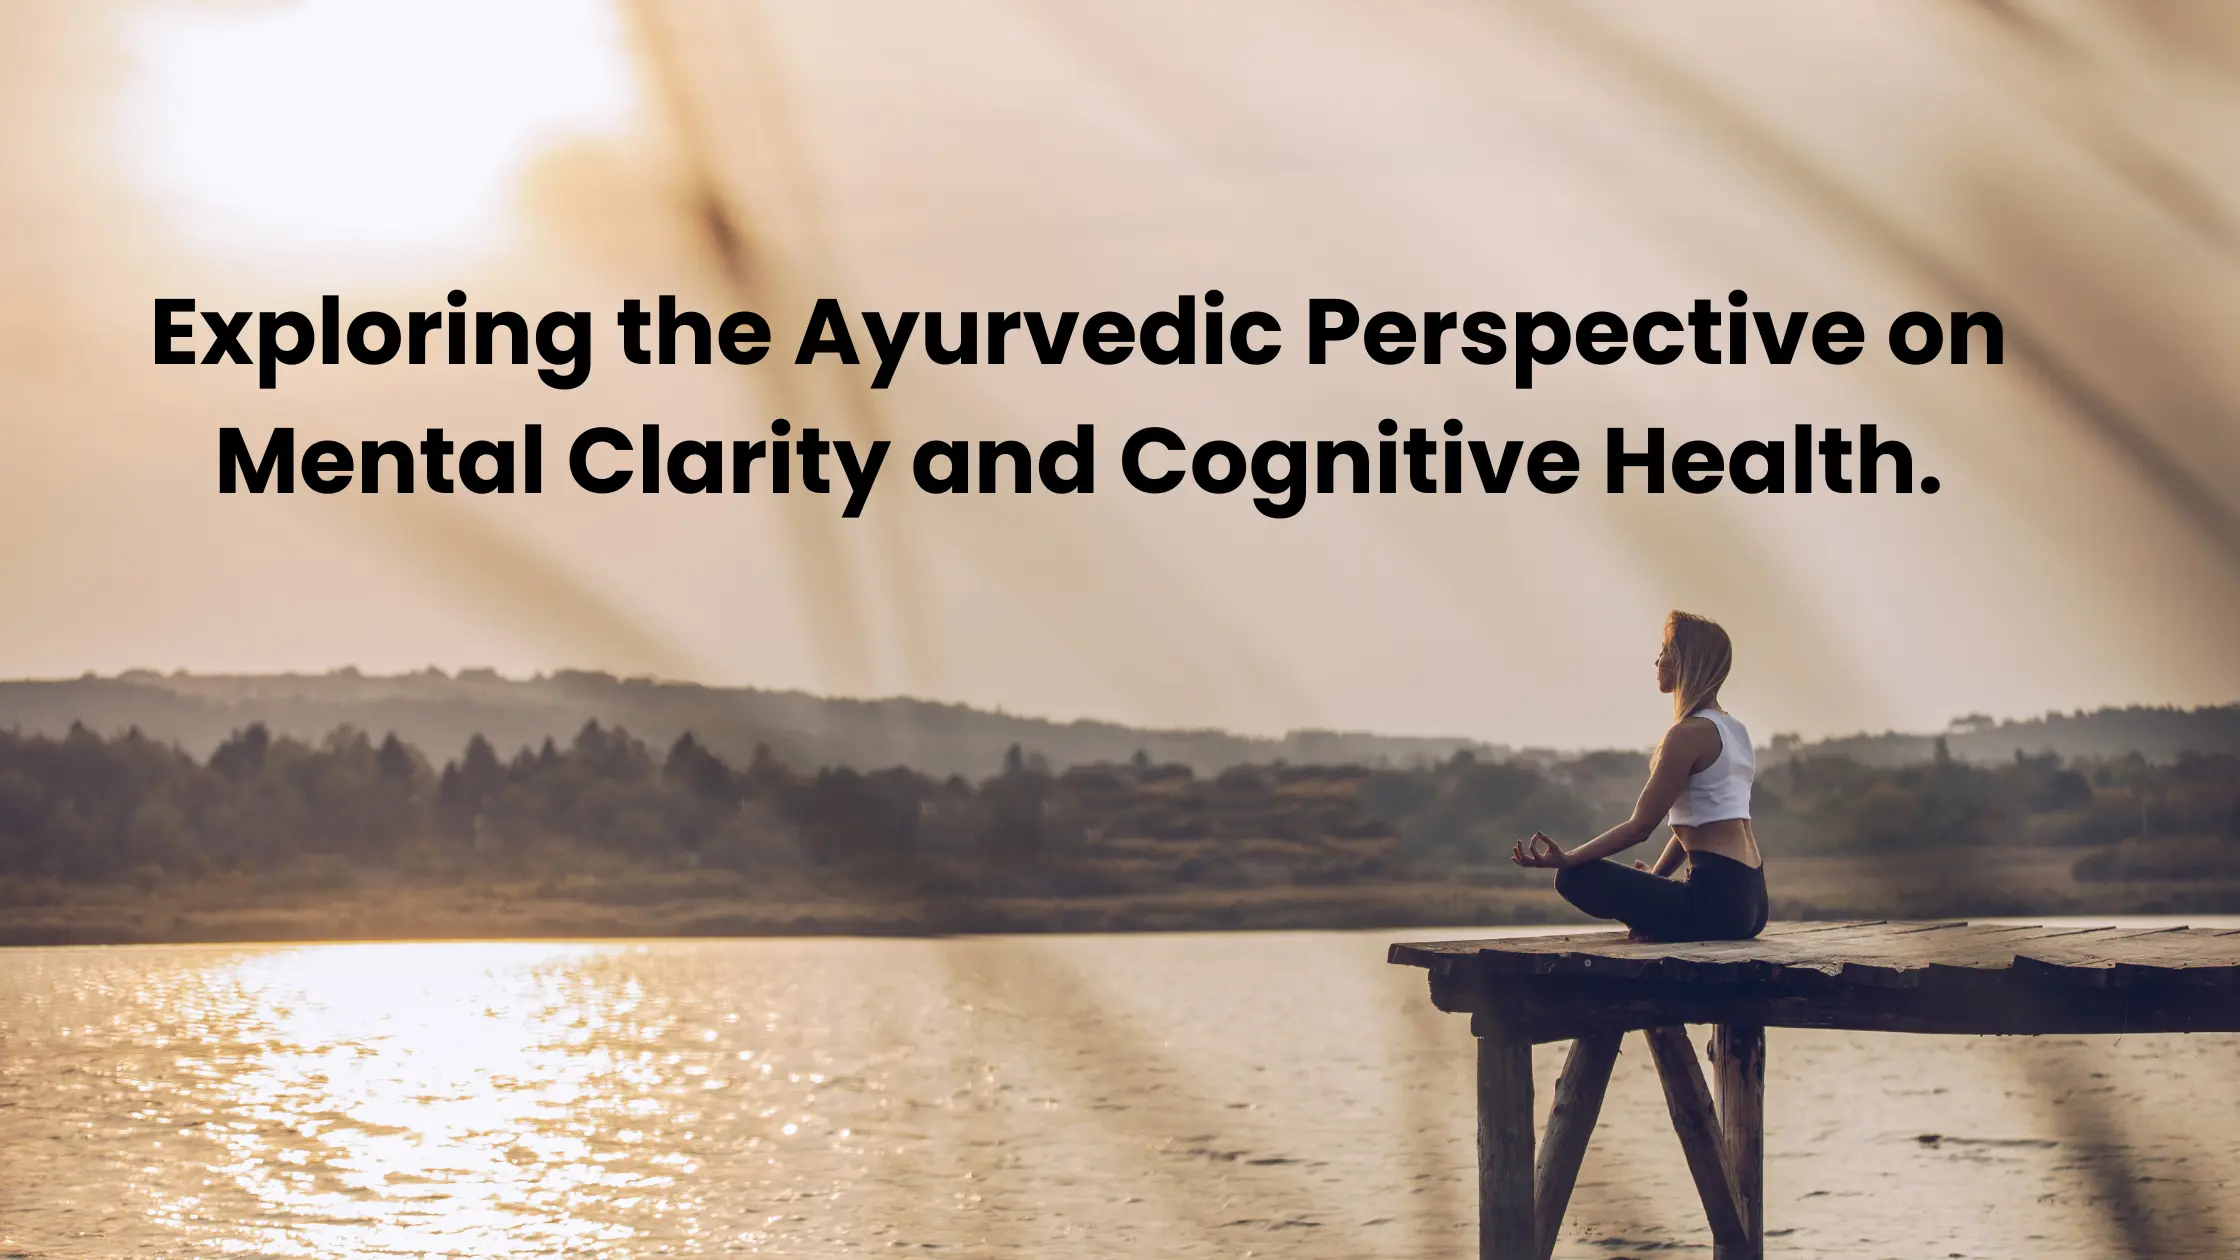 Exploring the Ayurvedic Perspective on Mental Clarity and Cognitive Health